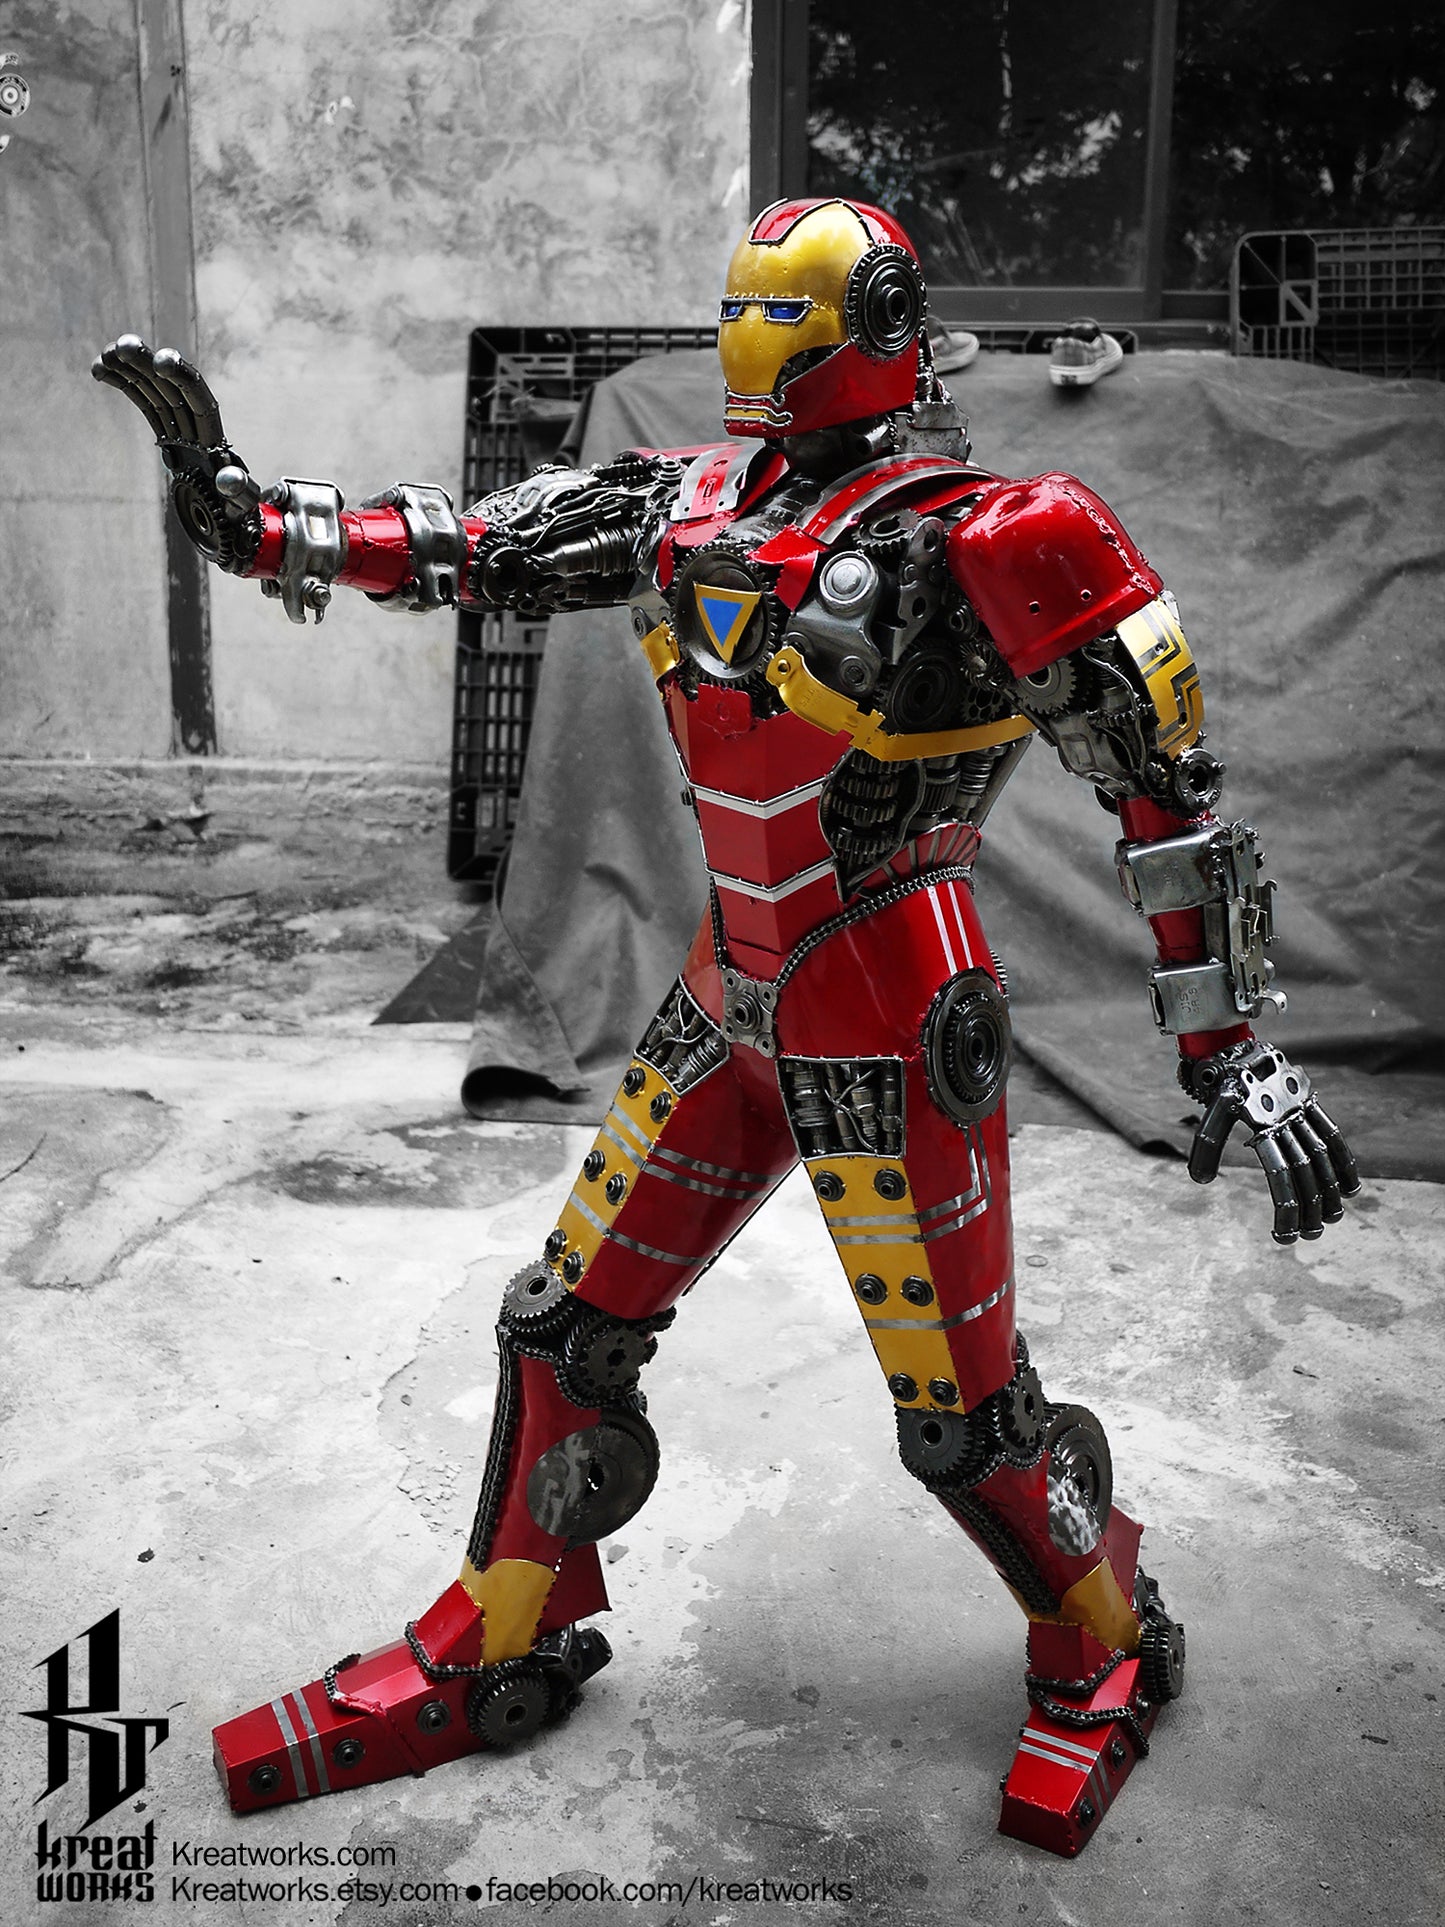 Recycled Metal Man (Gold&Red) (1.25 m / 4.1 ft height) (made-to-order) / Recycle Metal Sustainable Sculpture Art